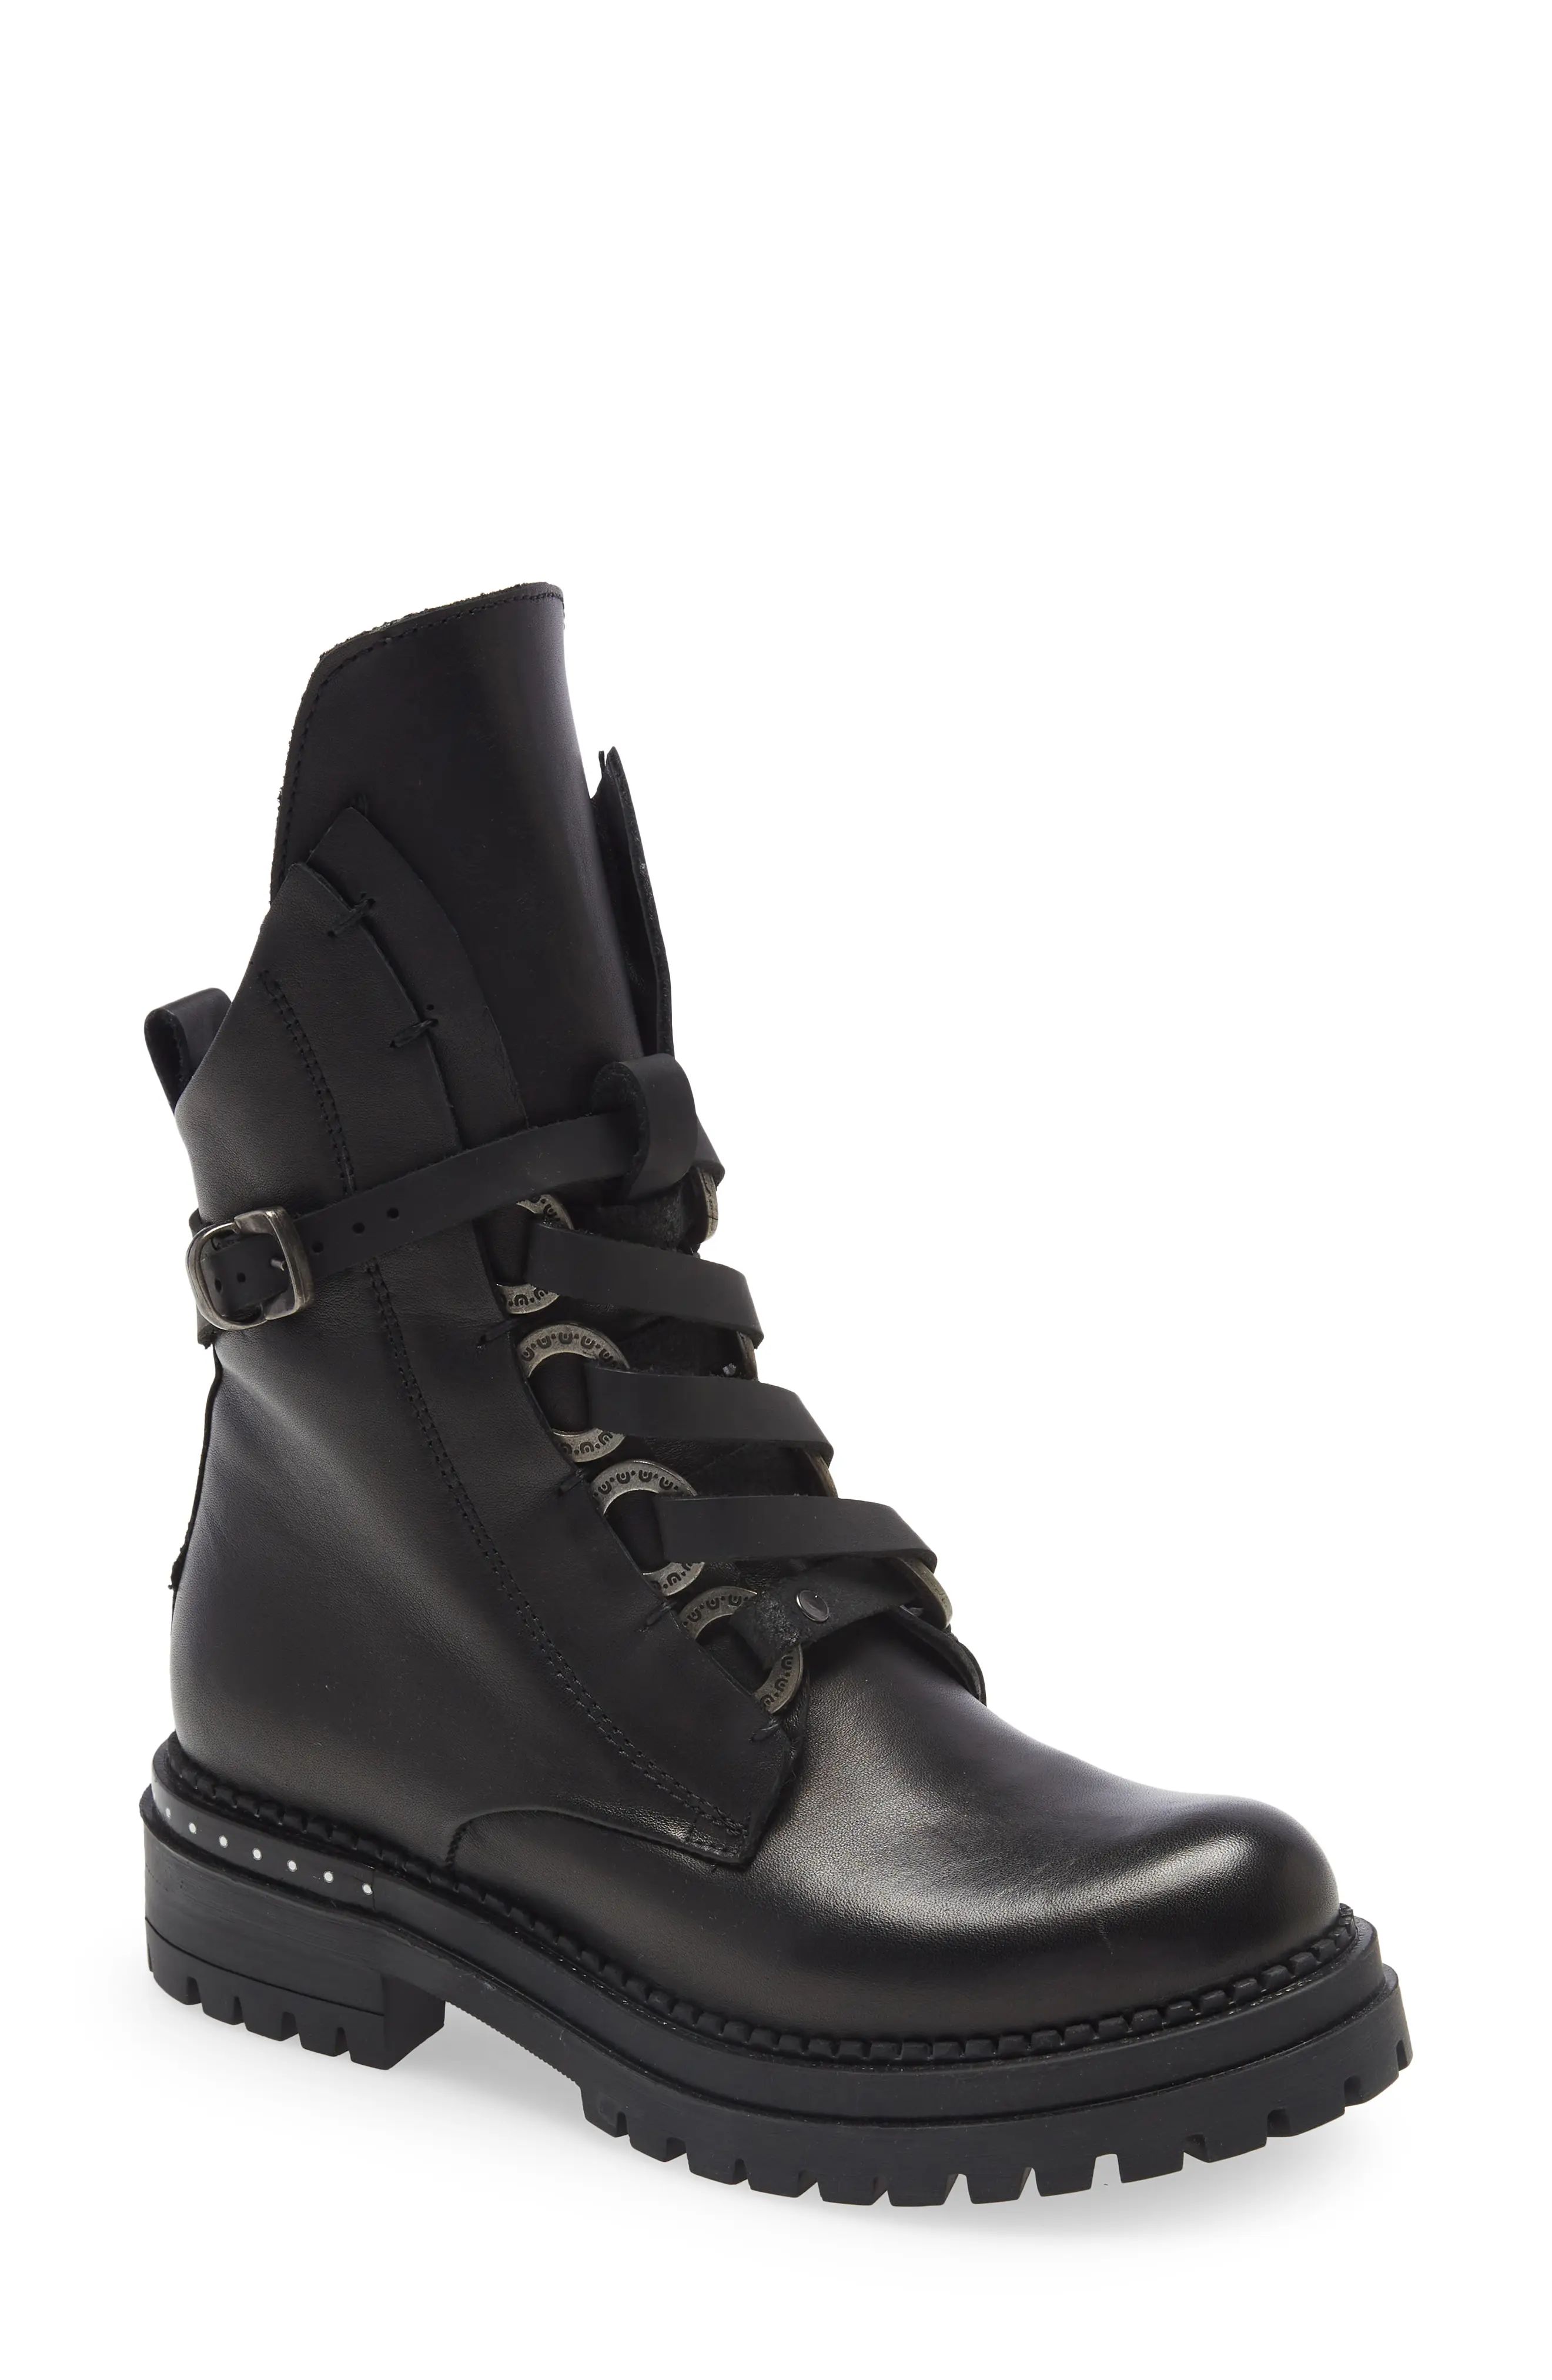 Sheridan Mia March Combat Bootie in Black at Nordstrom, Size 9-9.5Us | Nordstrom